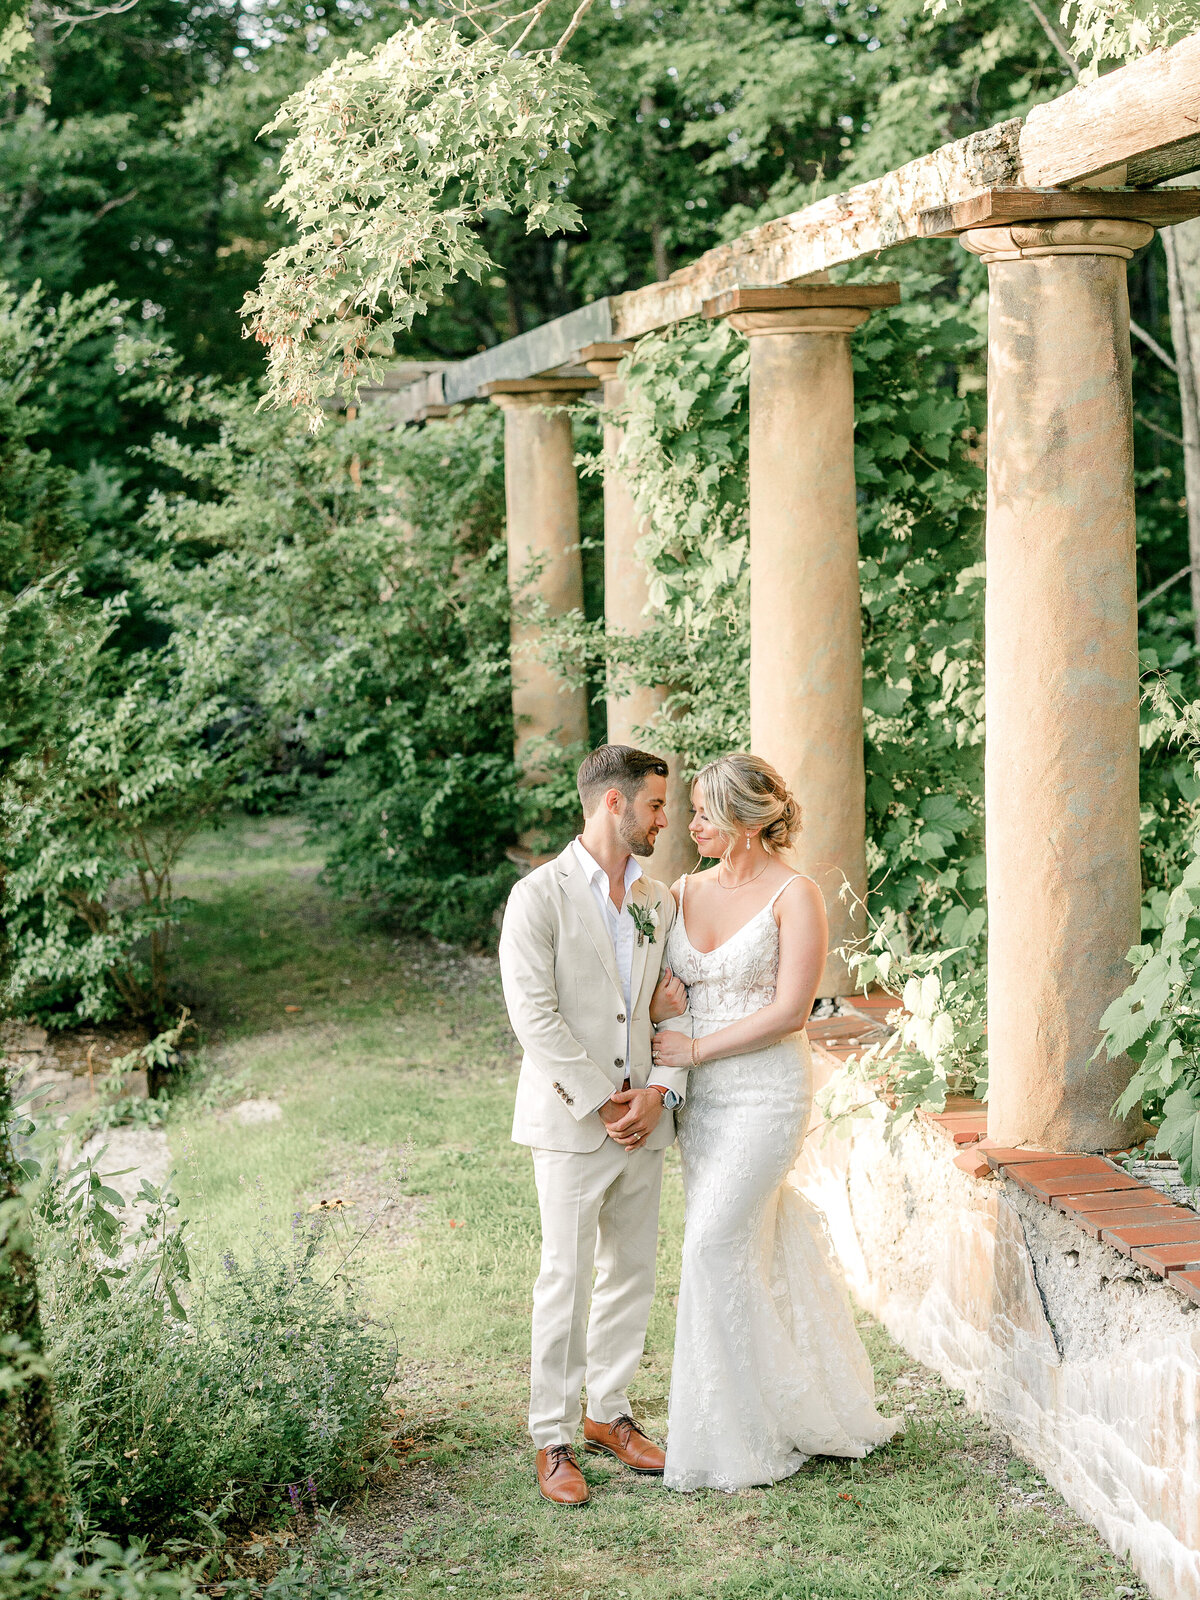 Bride and groom in a tan suit standing in a garden with old columns and greenery